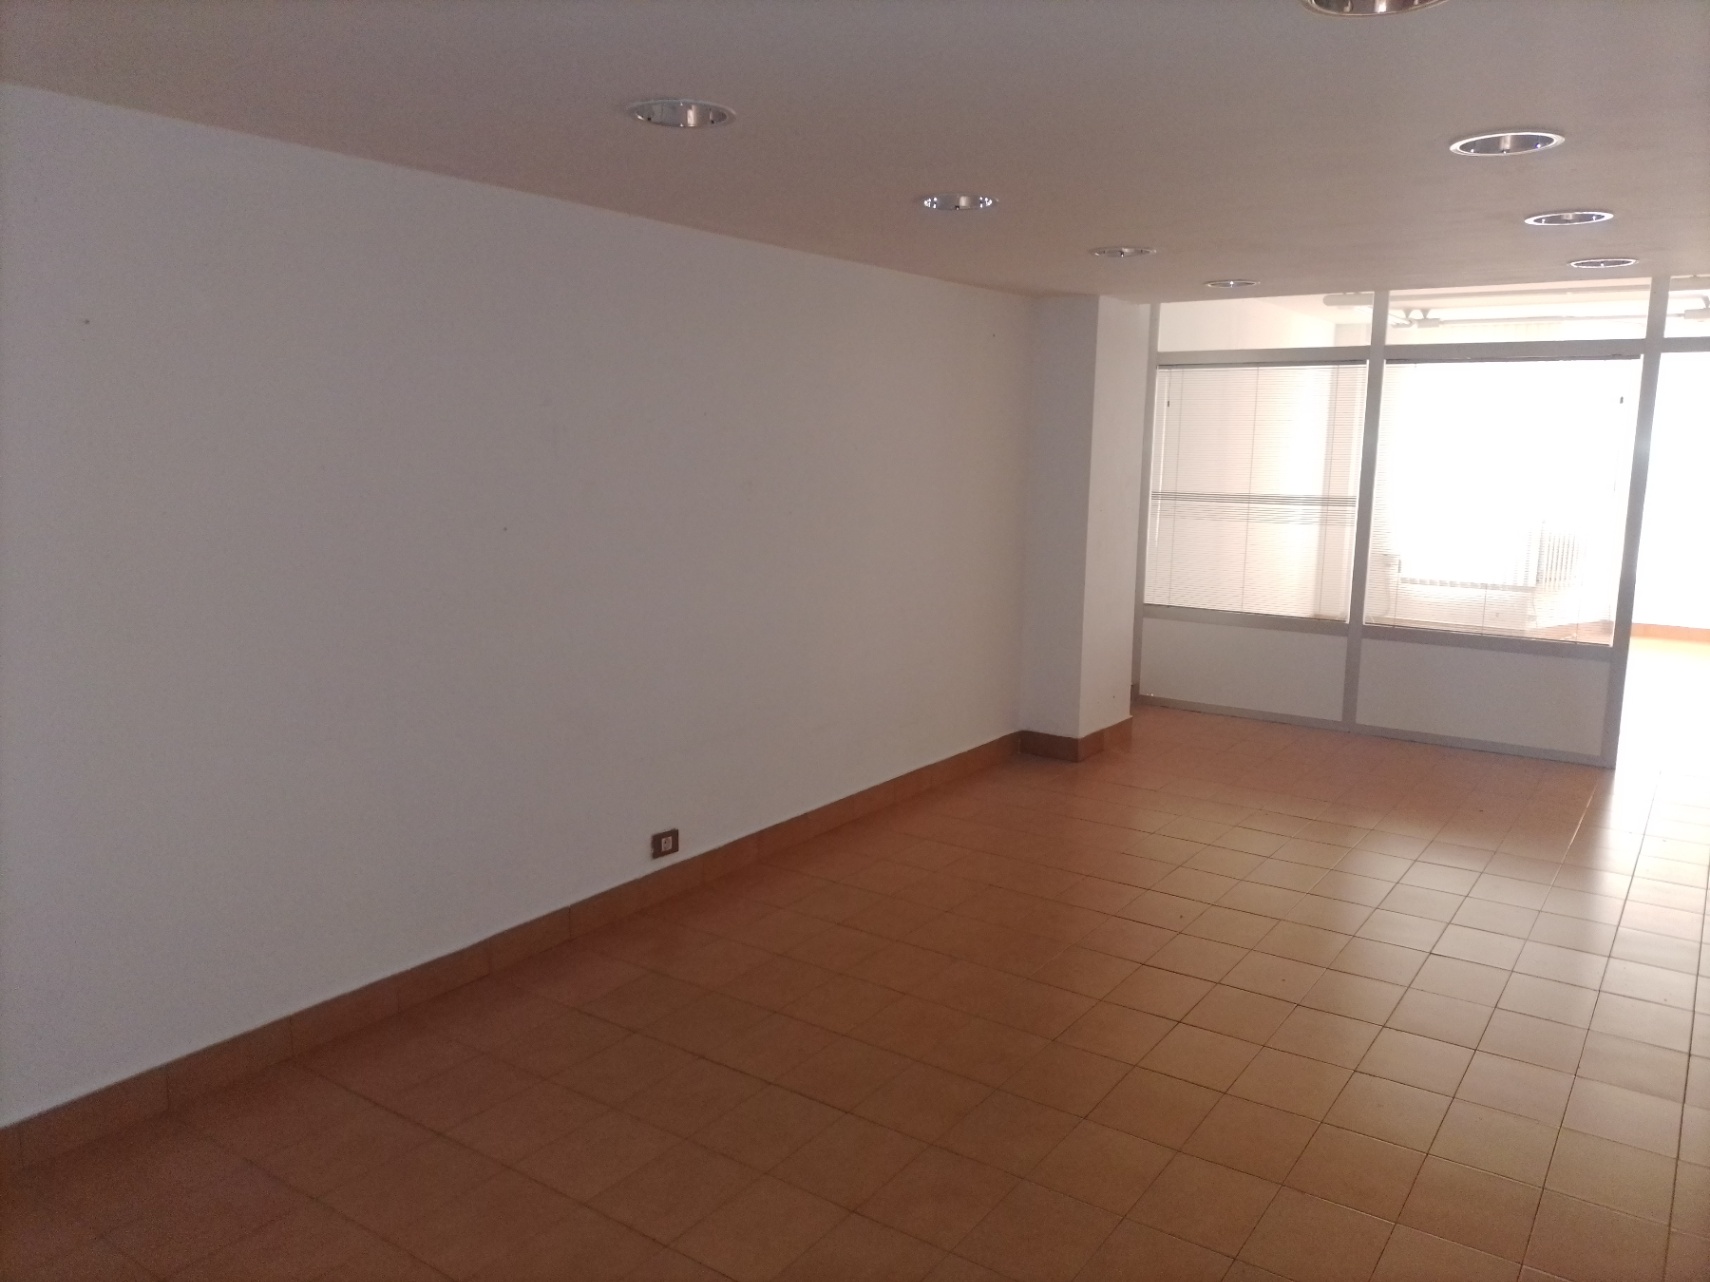 Office for sale in the city center